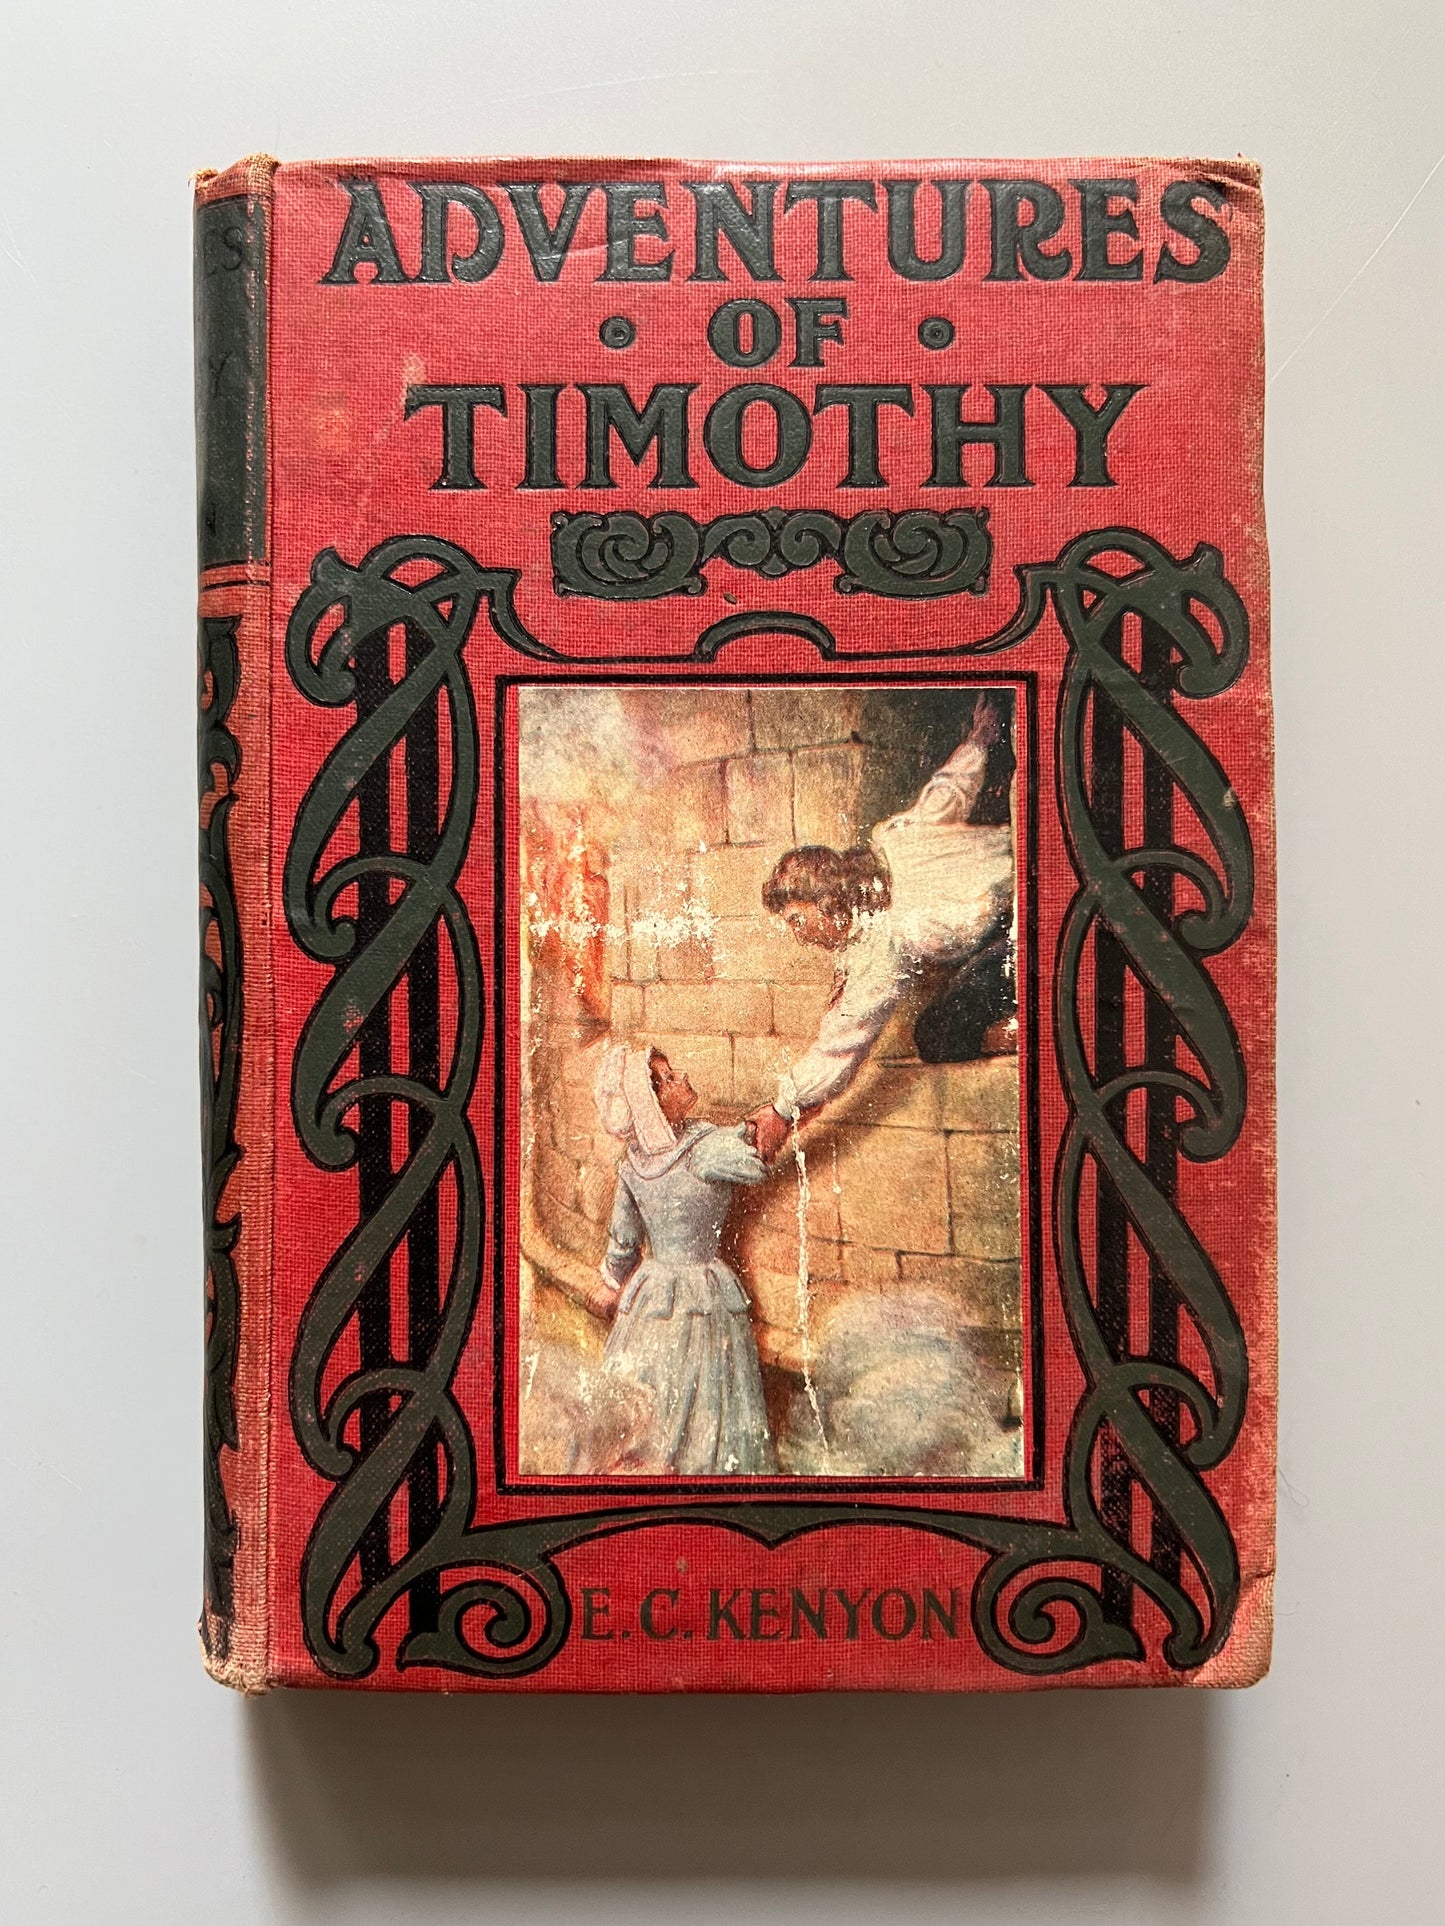 The adventures of Timothy, E. C. Kenyon - The Religious Tract Society, ca. 1920